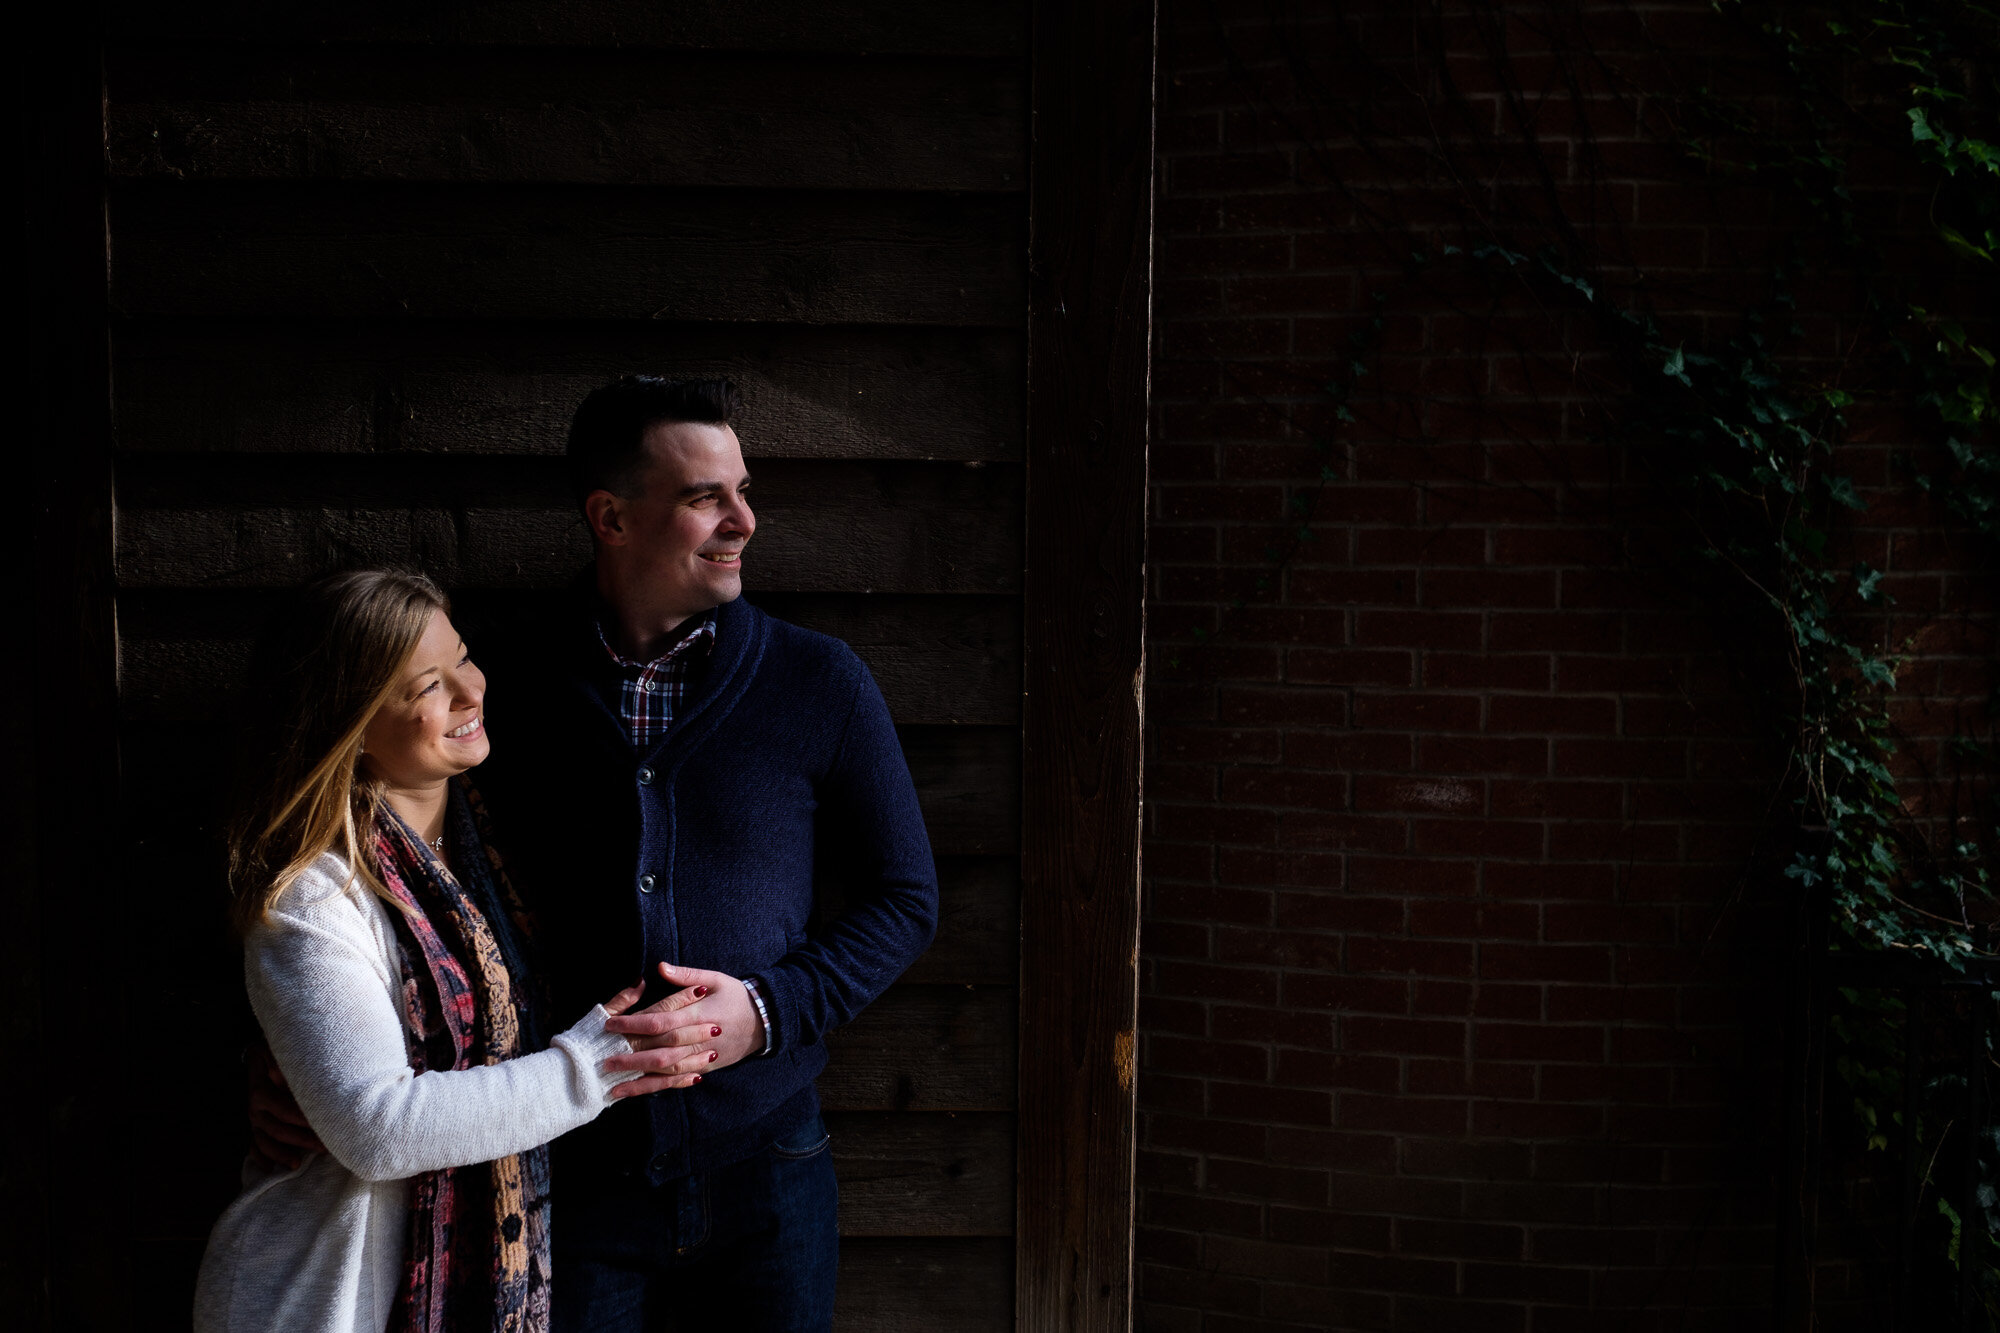  Engagement photographs of Emily + Aaron from their engagement session at Riverdale Farm in Toronto by Toronto wedding photographer Scott Williams.   These two are getting married at Archeo in Toronto’s distillery district this winter. 